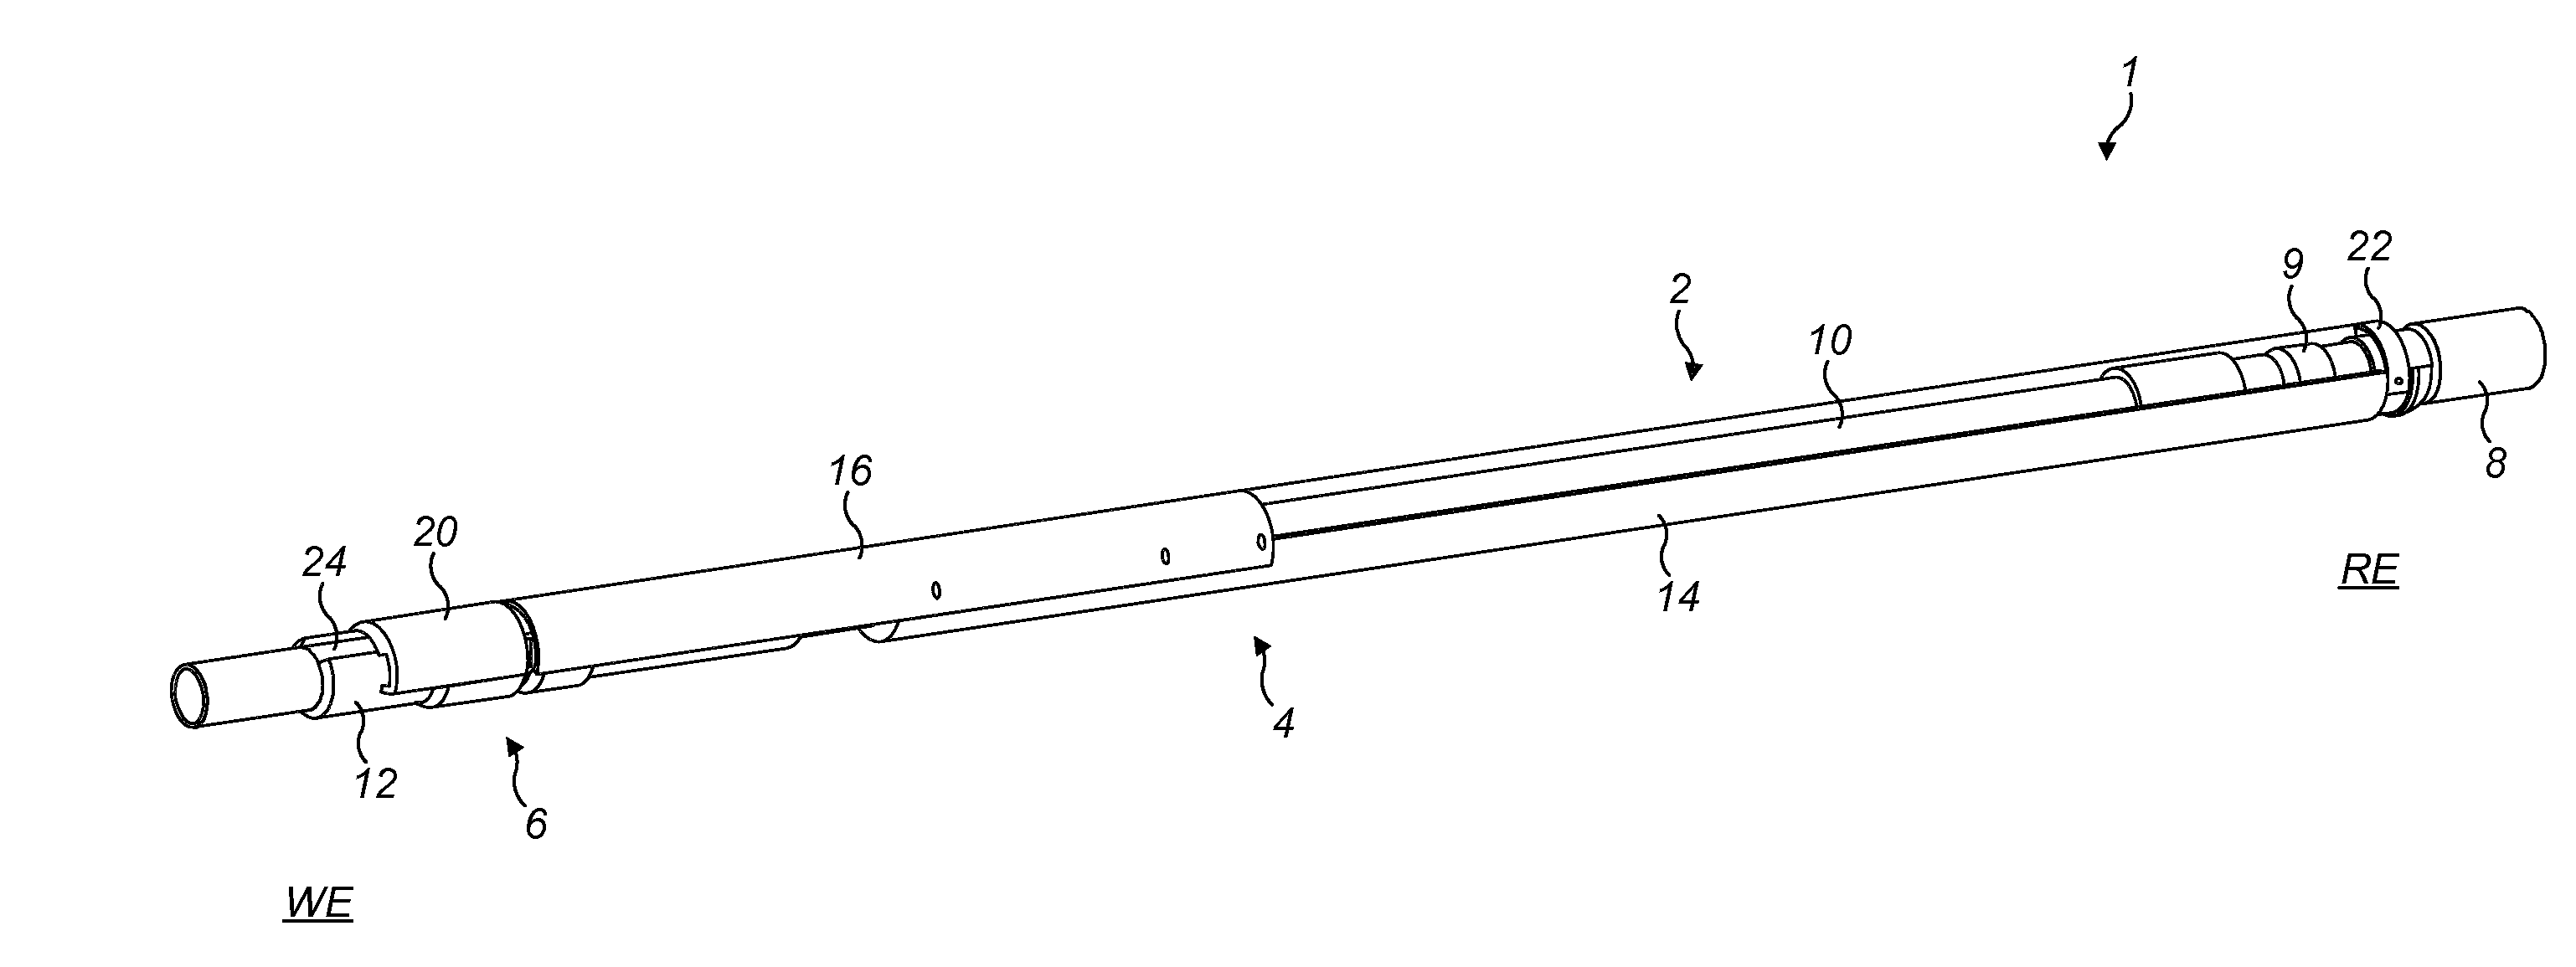 Downhole umbilical release assembly